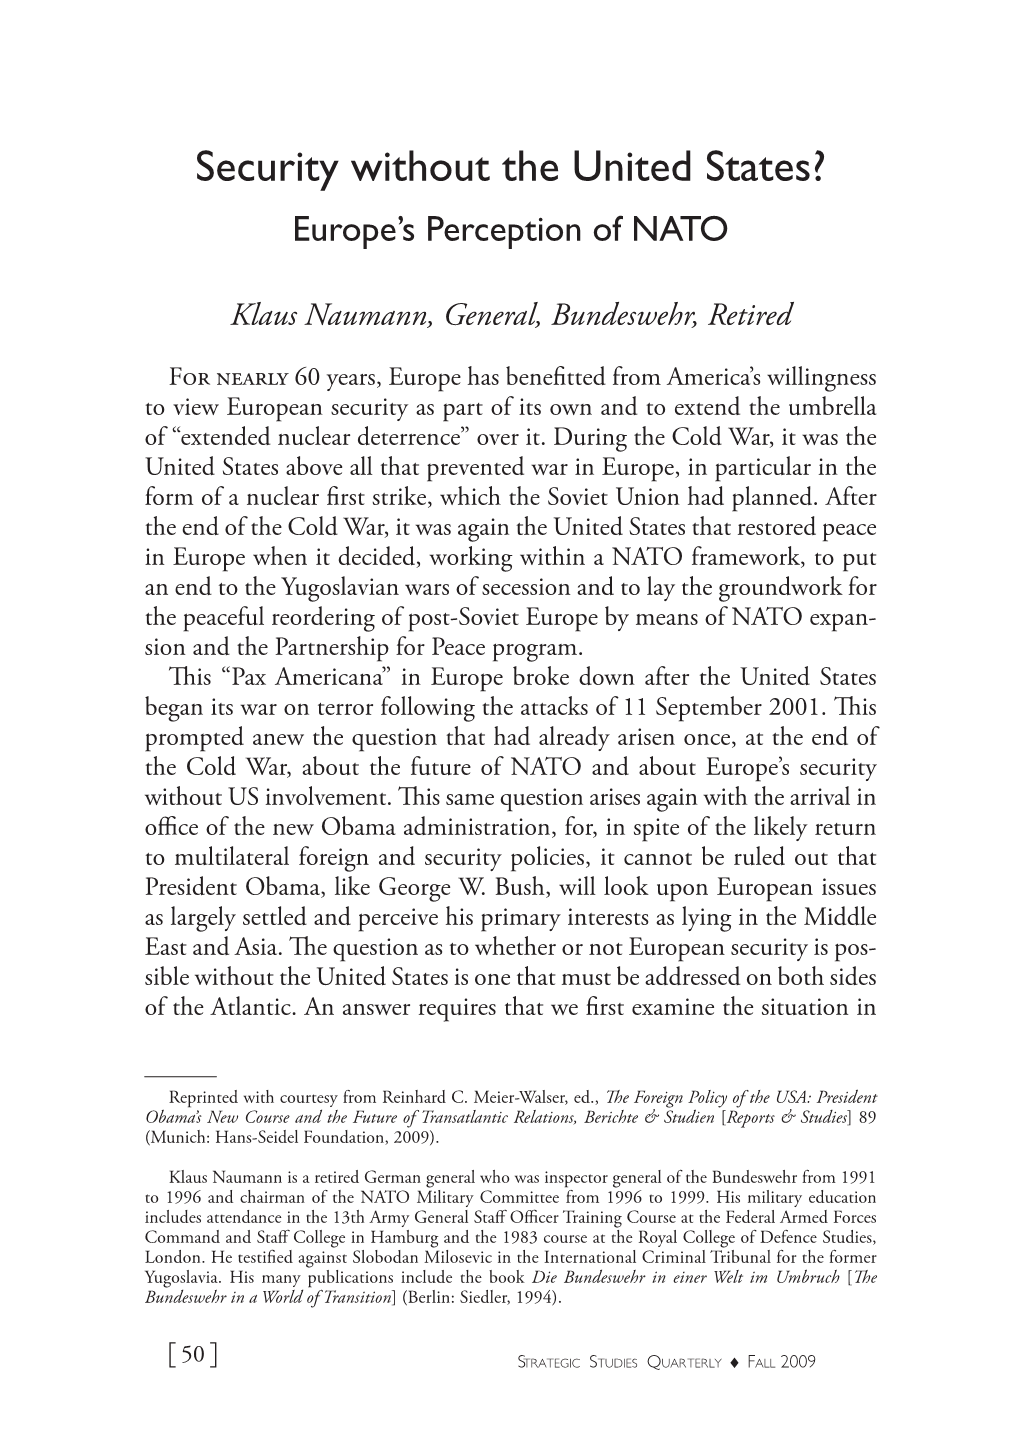 Security Without the United States? Europe's Perception of NATO